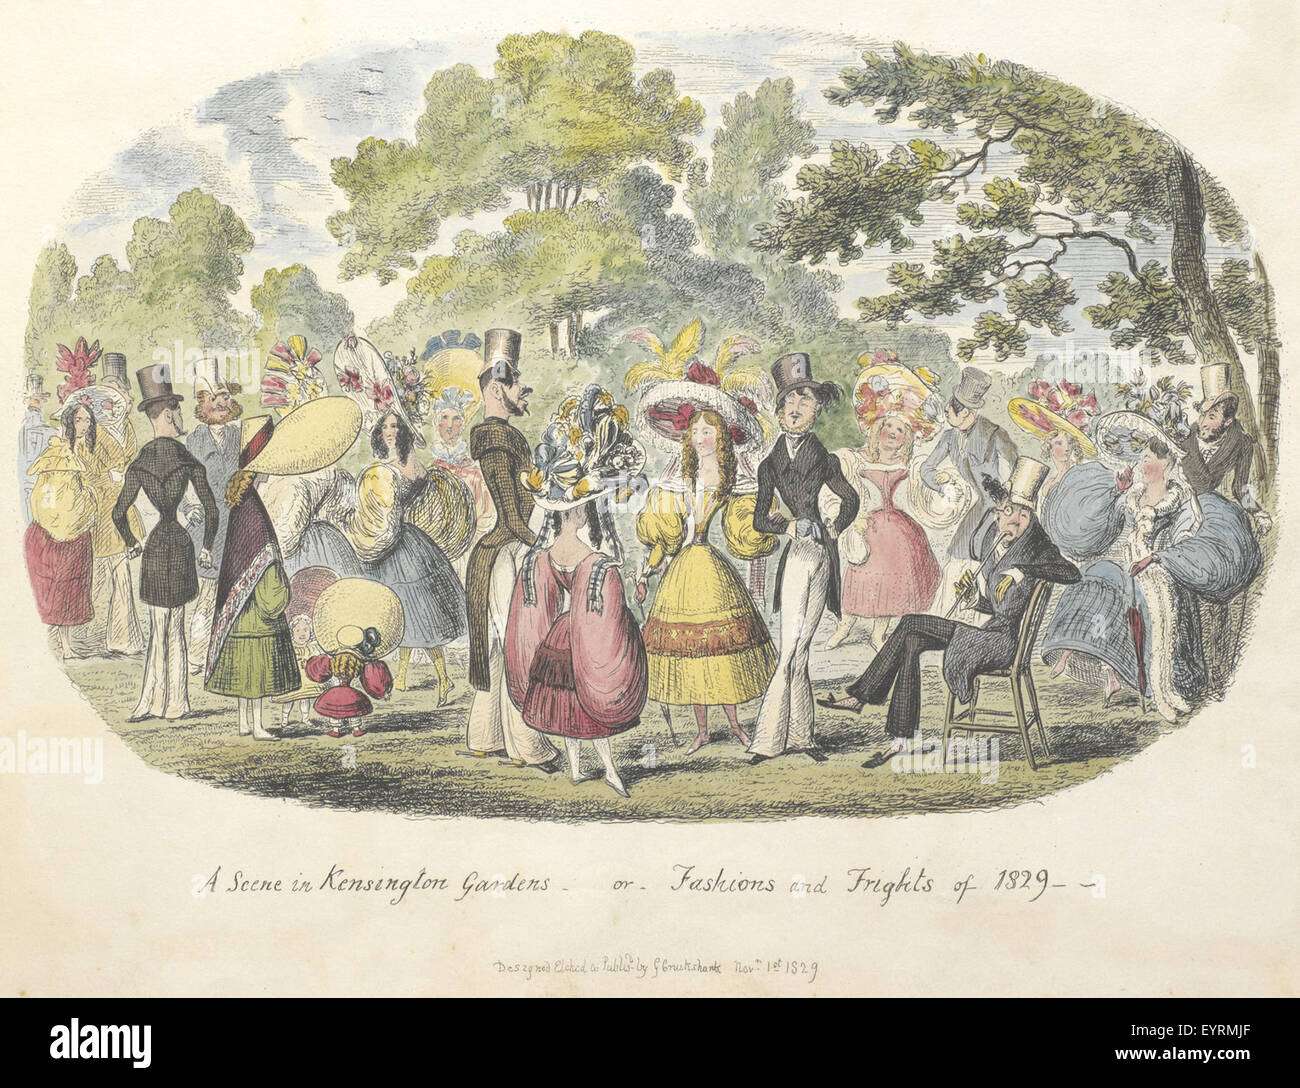 Scraps and sketches, etc. - caption: ''A scene in Kensington Gardens, or fashion and frights of 1829'. An amusing sketch showing people dressed up, in the park.' Scraps and sketches, etc - caption ''A scene in Kensington Stock Photo